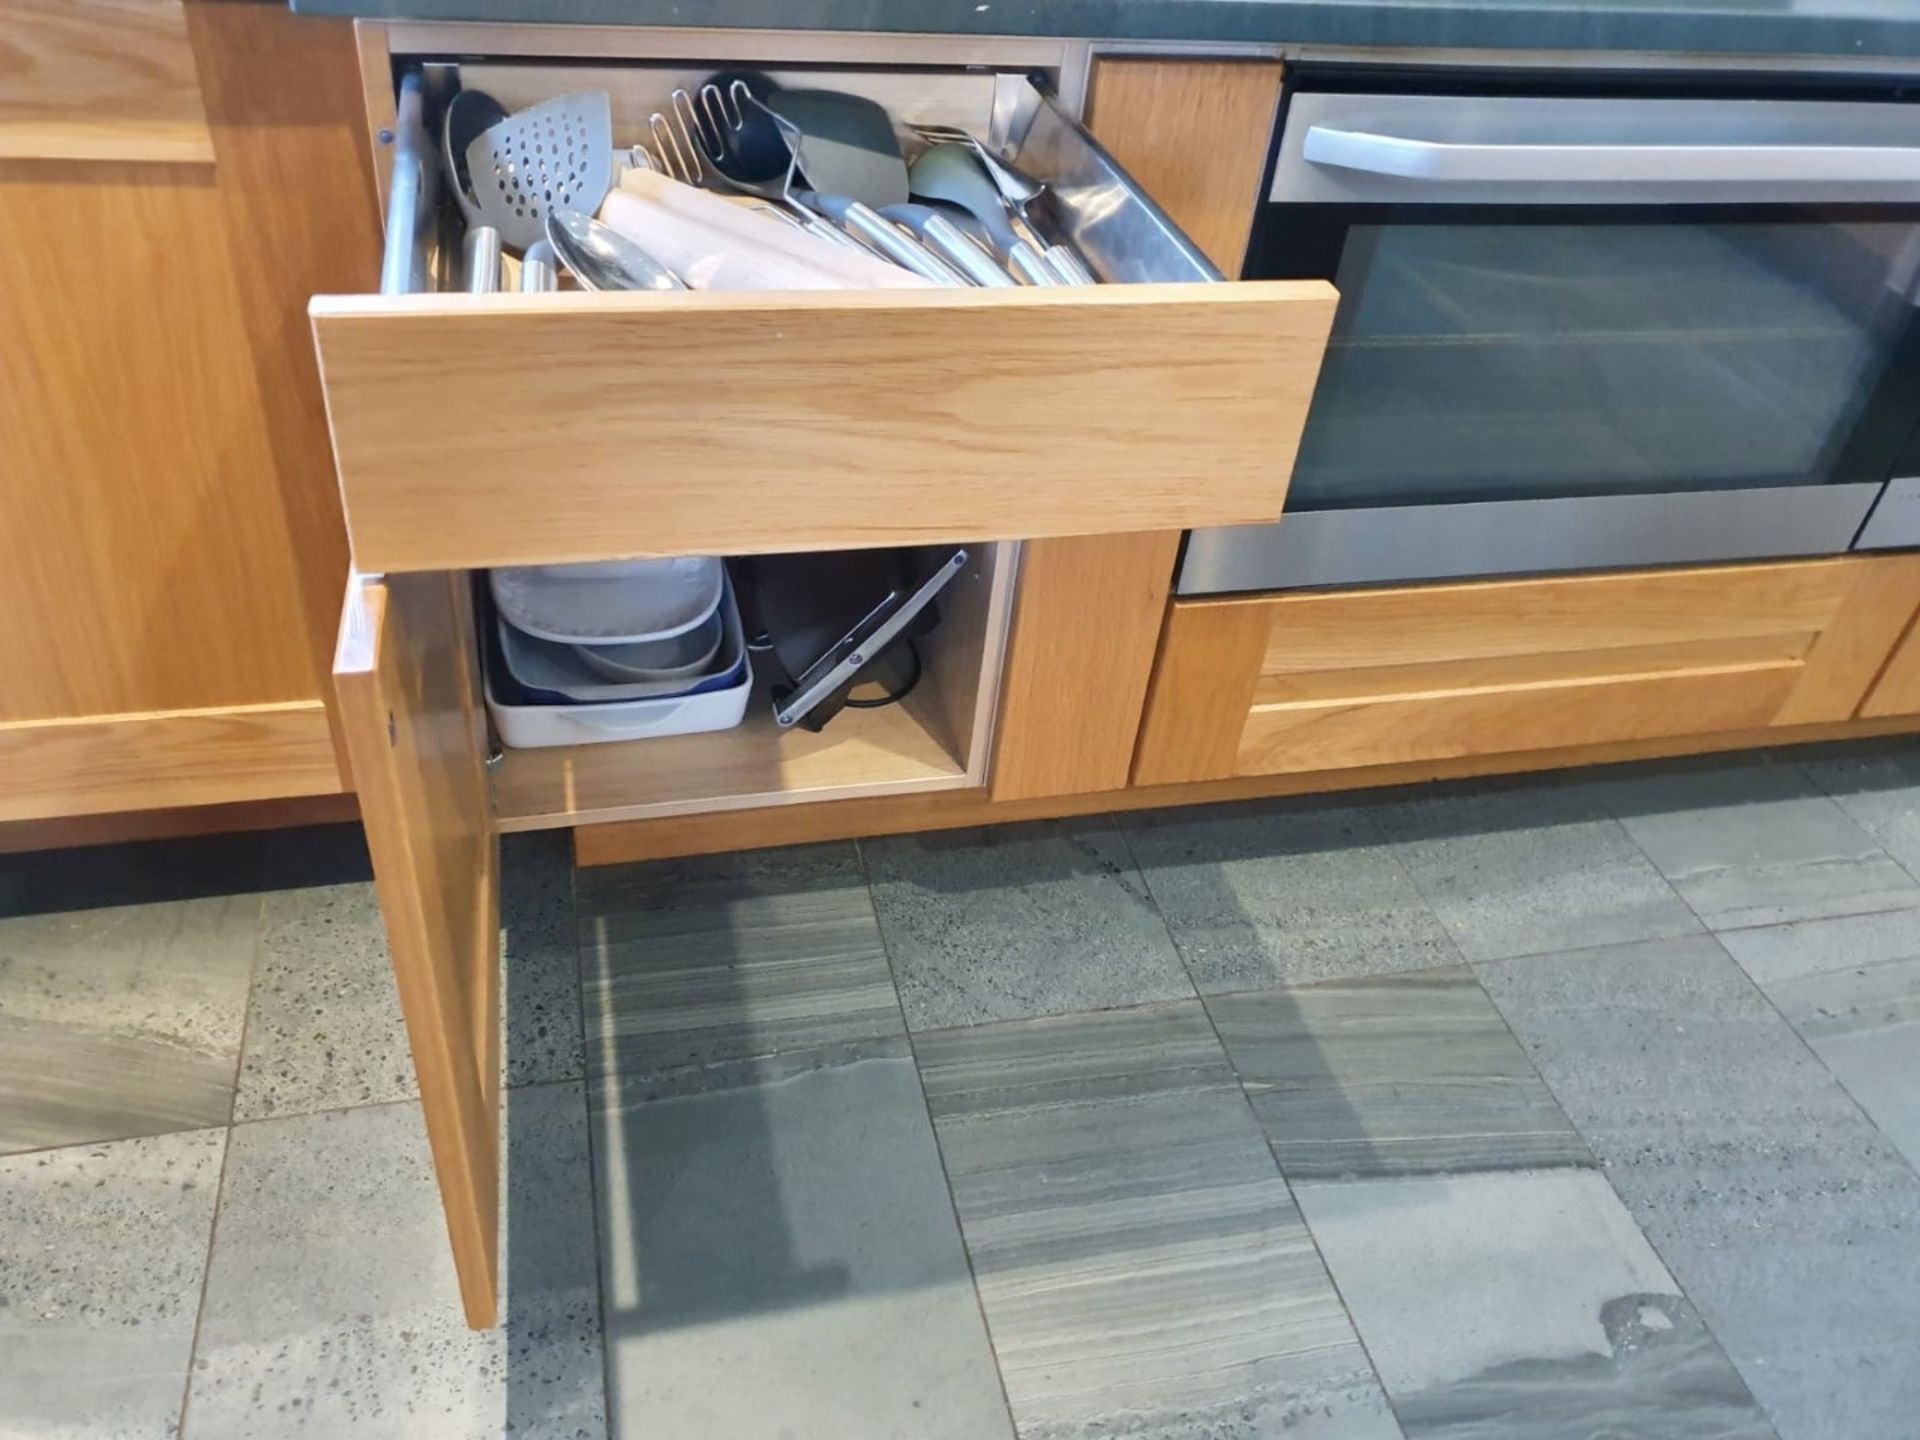 1 x Solid Oak Fitted Kitchen With Integrated Miele Appliances - CL487 - Location: Wigan *NO VAT* - Image 65 of 82